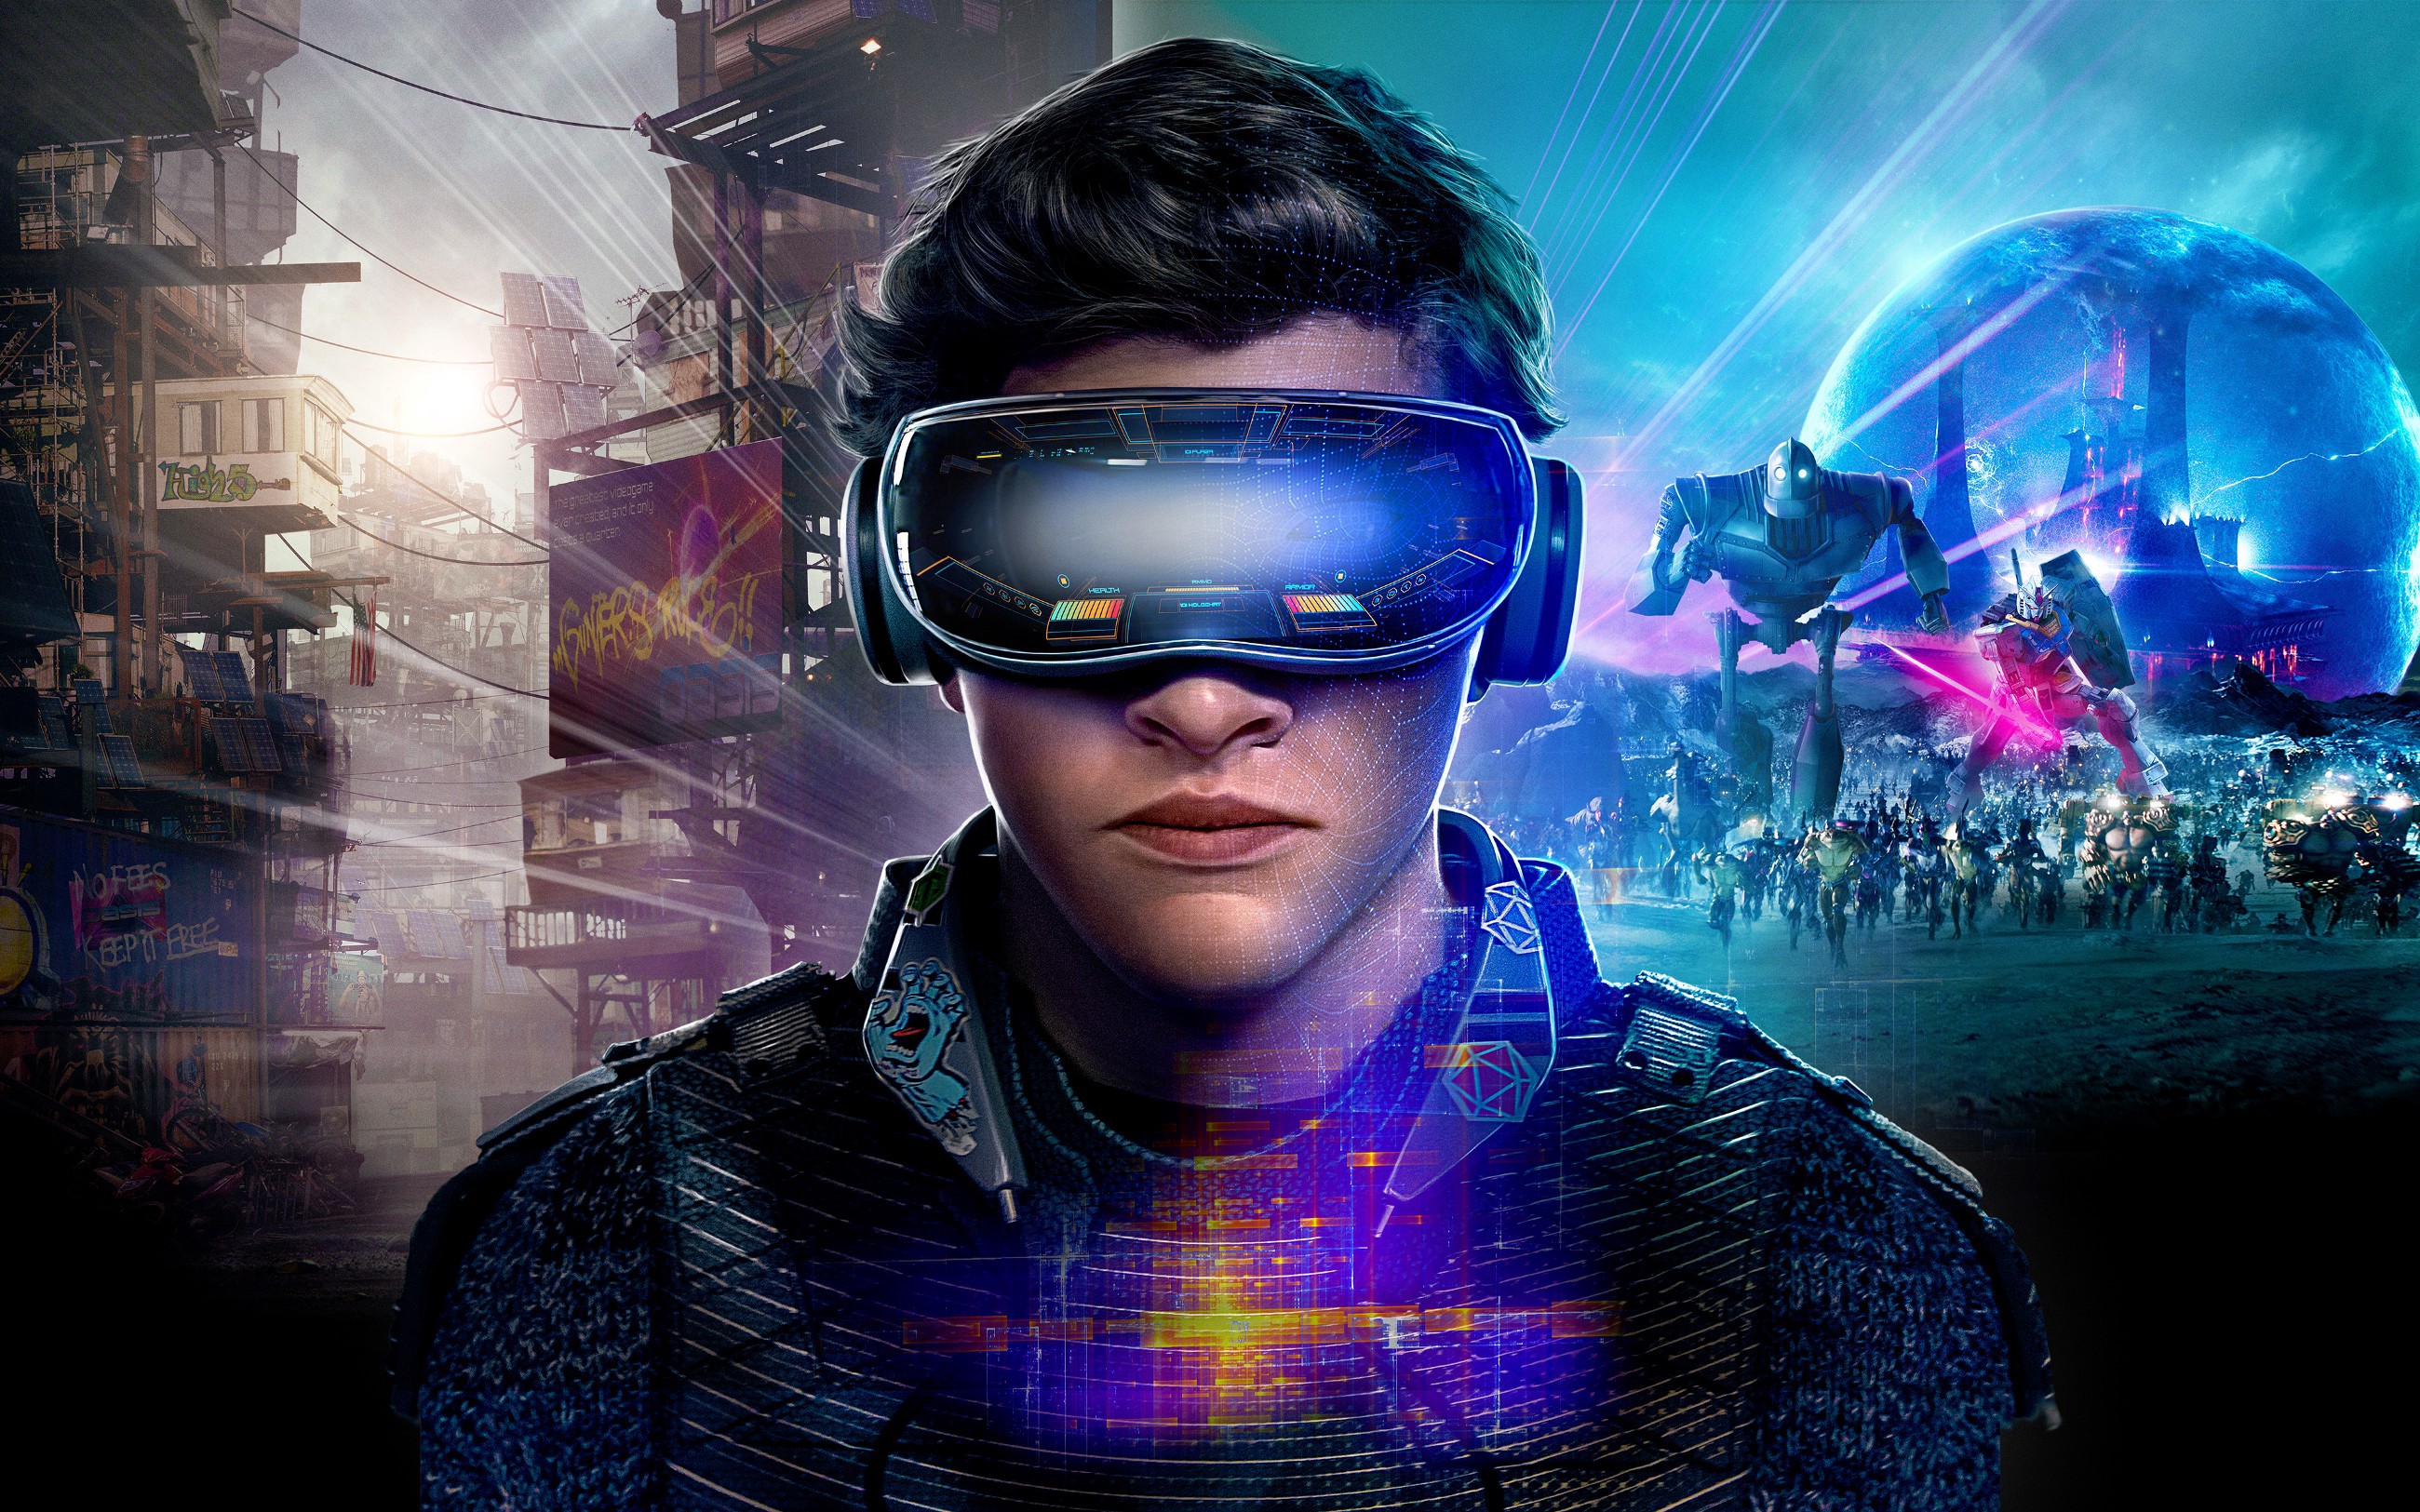 Ready Player One: Complete Easter Egg and Reference Guide